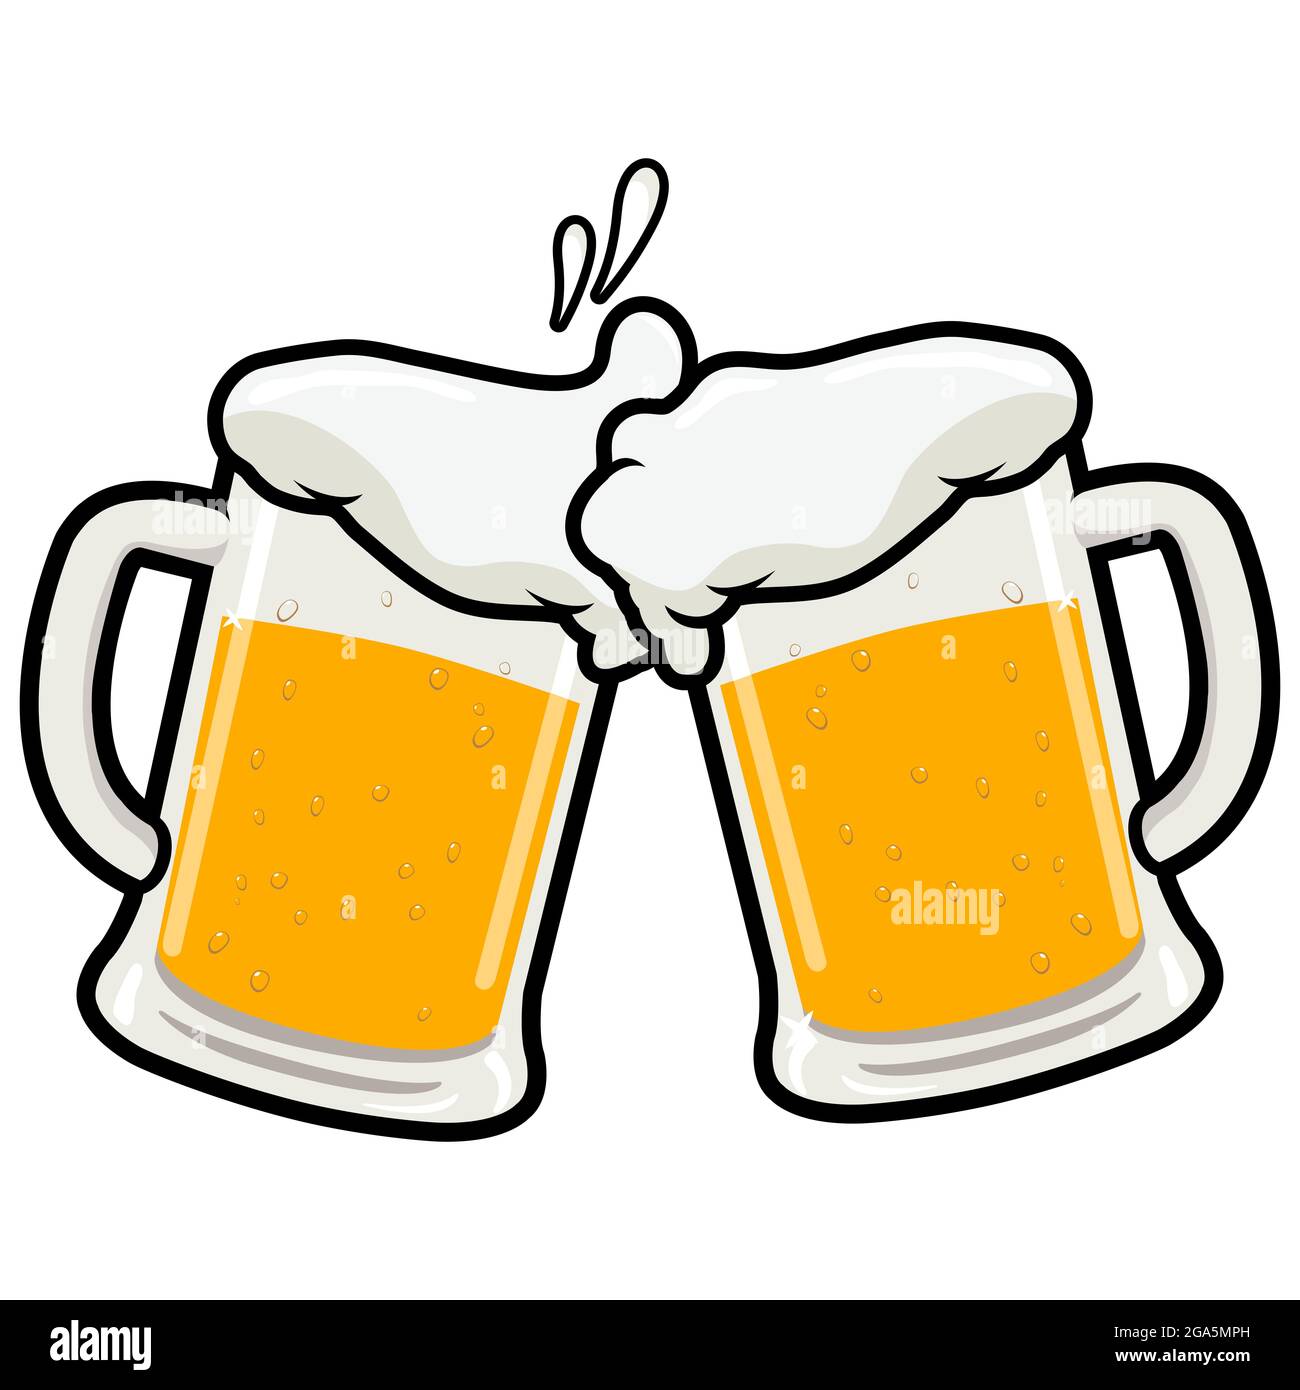 Illustration of two beer mugs toasting. Stock Photo